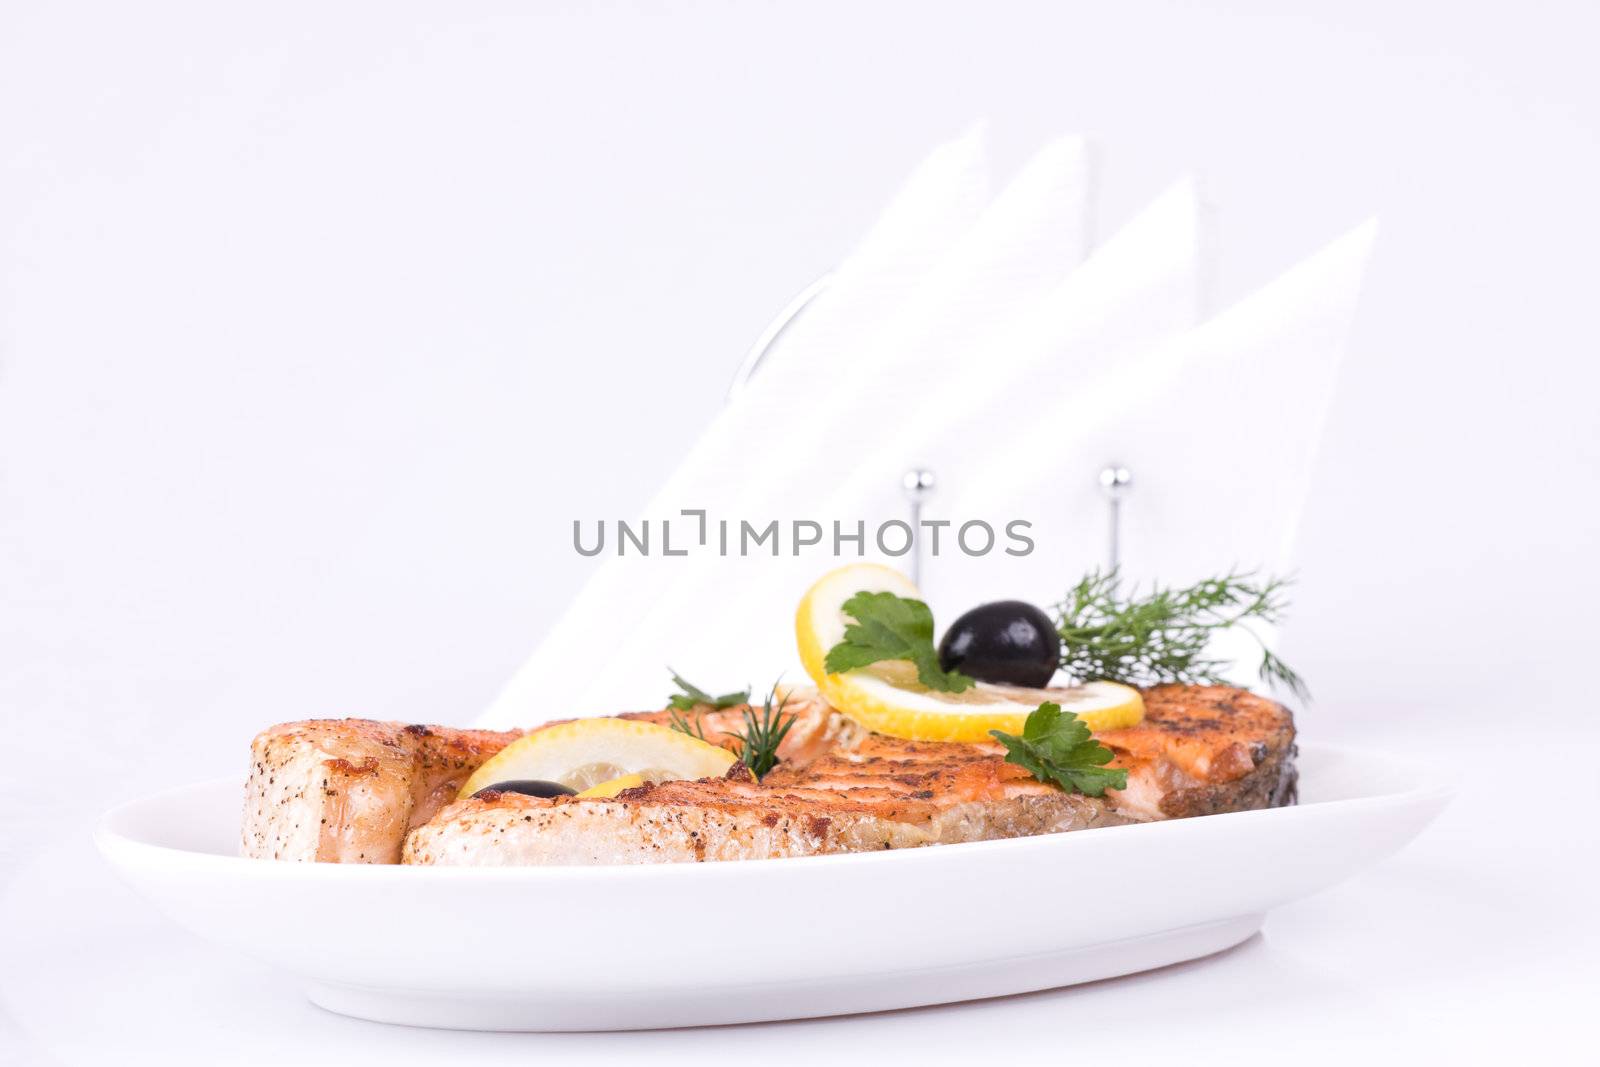 Appetizing Grilled Salmon with lemon, black olives and mixed greens isolated over white